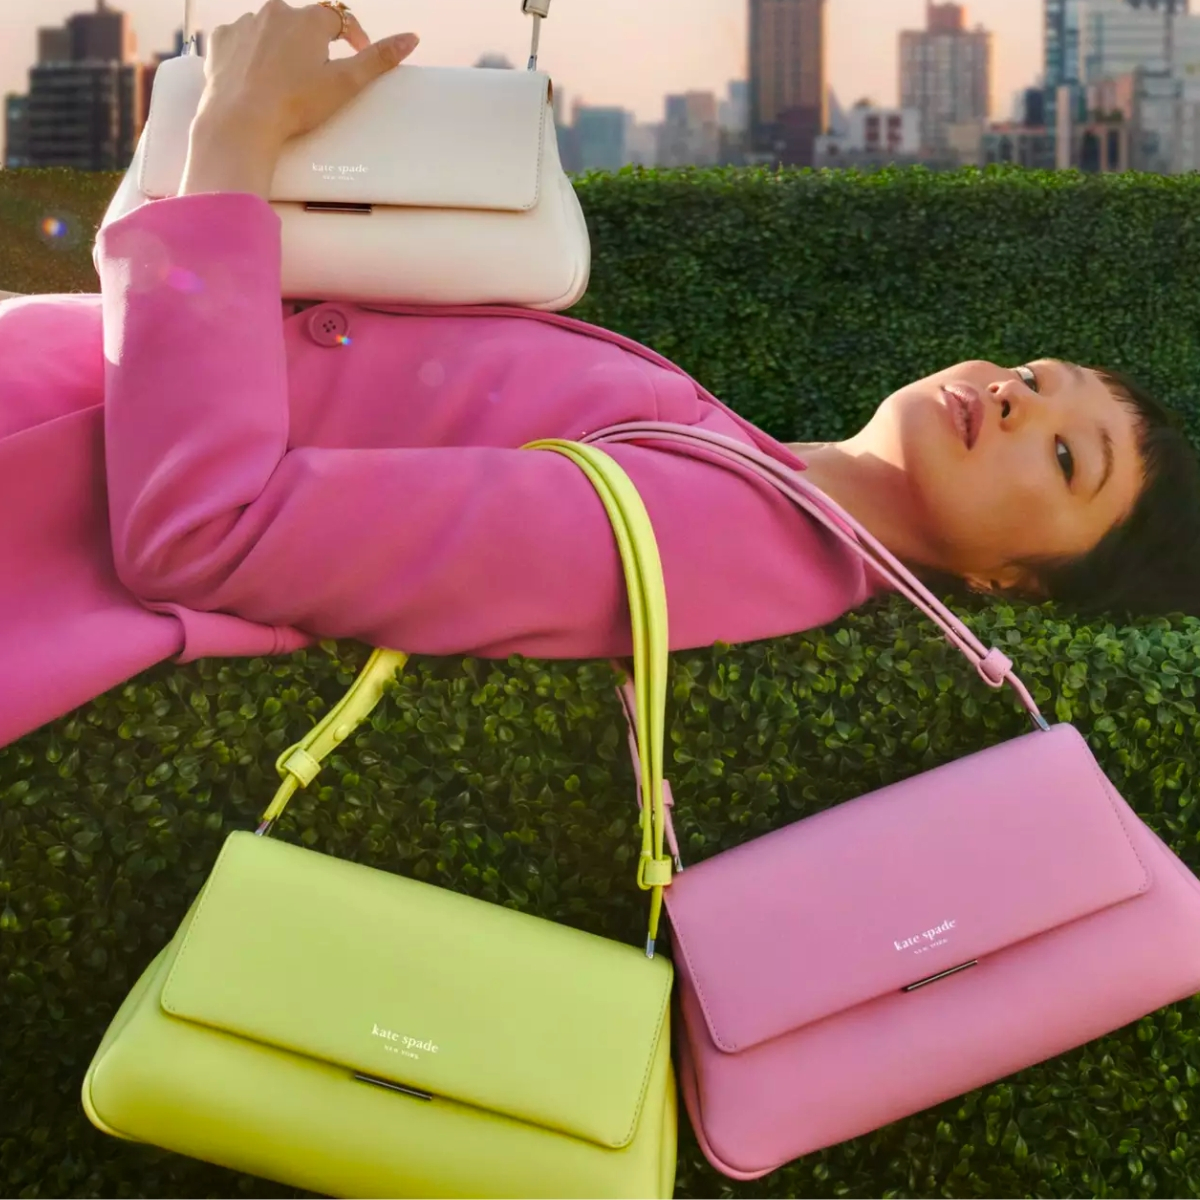 Spring Into Savings With 70% Off Kate Spade Deals & an Extra 20% Off